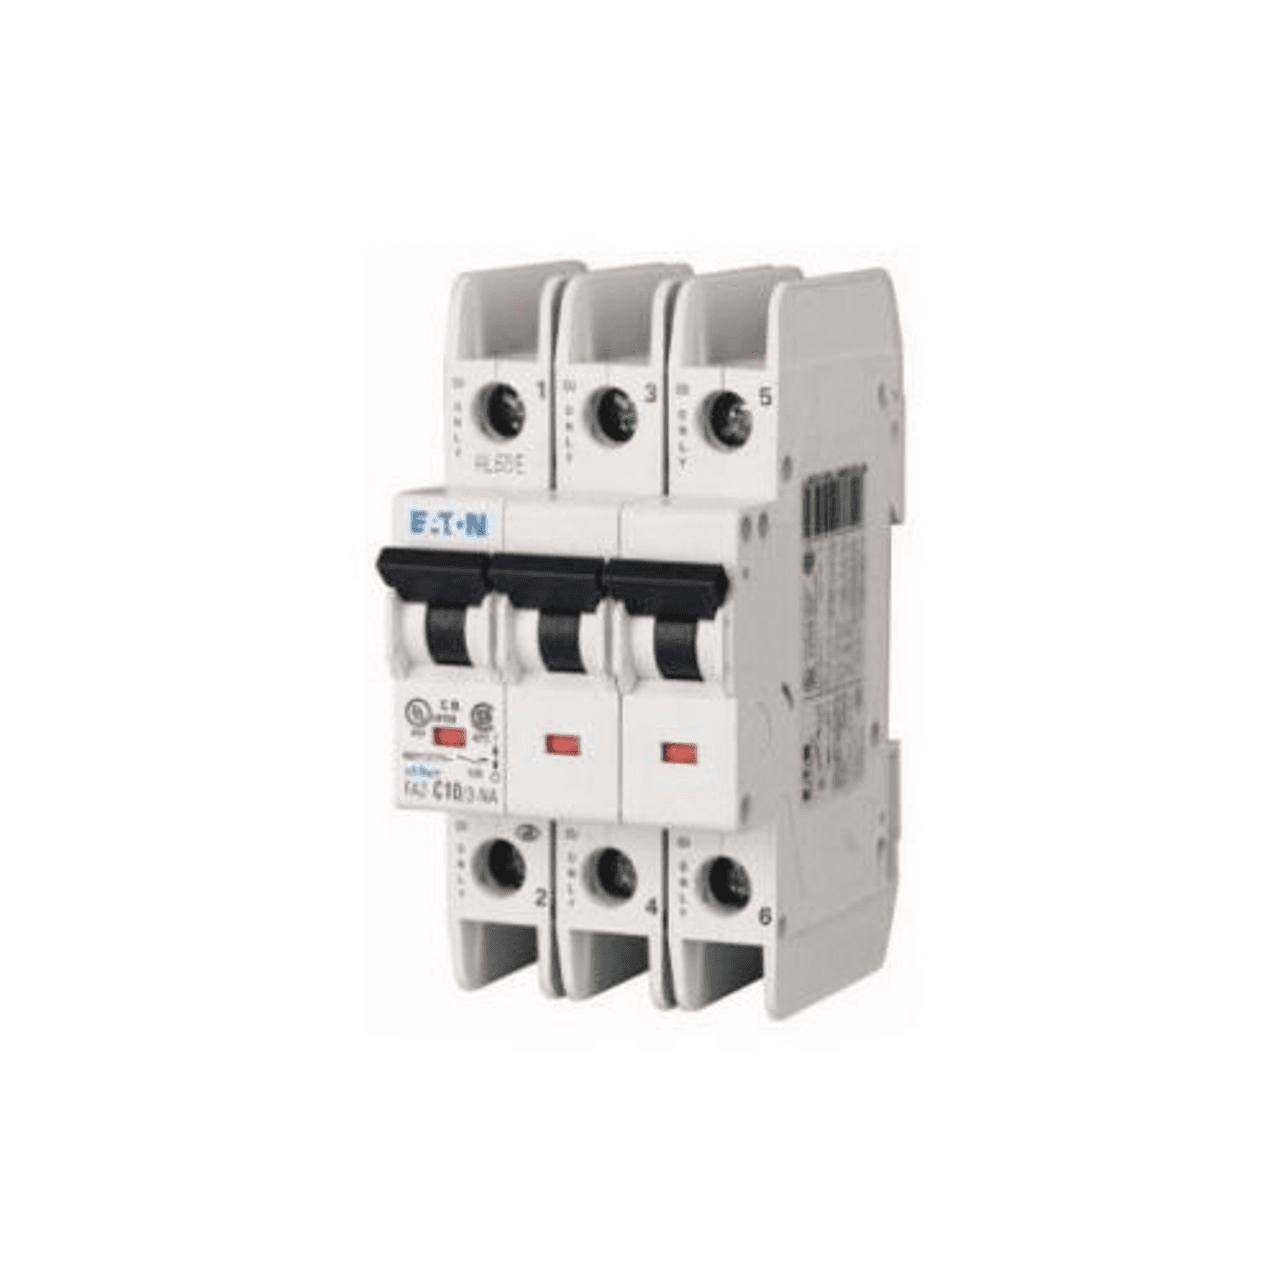 Eaton FAZ-B13/3-NA 277/480 VAC 50/60 Hz, 13 A, 3-Pole, 10/14 kA, 3 to 5 x Rated Current, Screw Terminal, DIN Rail Mount, Standard Packaging, B-Curve, Current Limiting, Thermal Magnetic